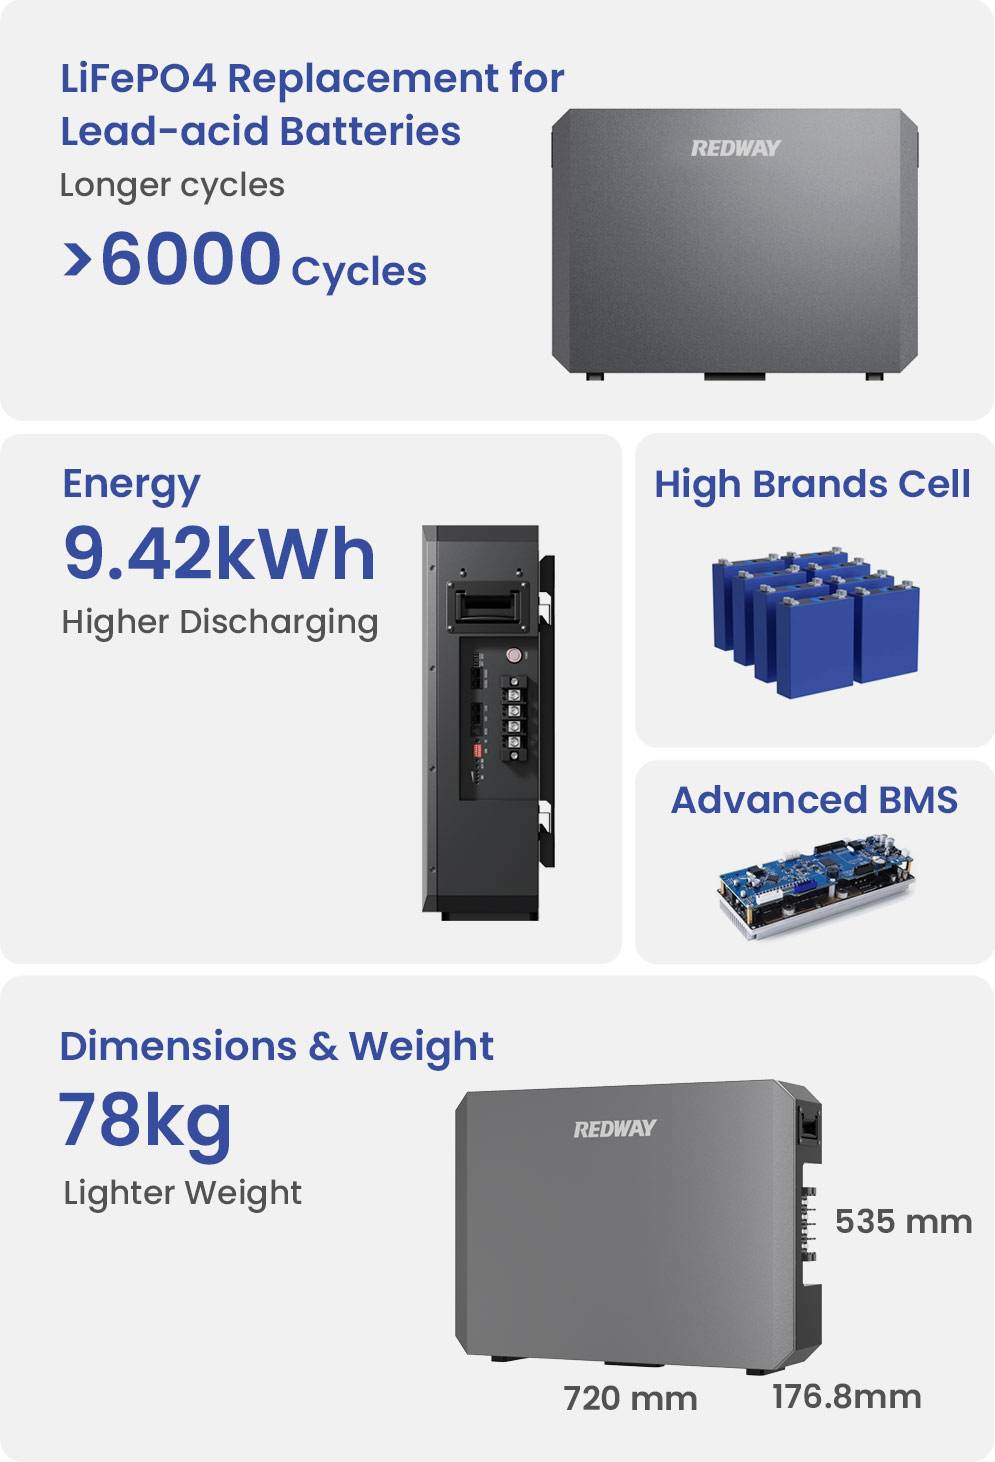 redway-PW51184-S-powerwall